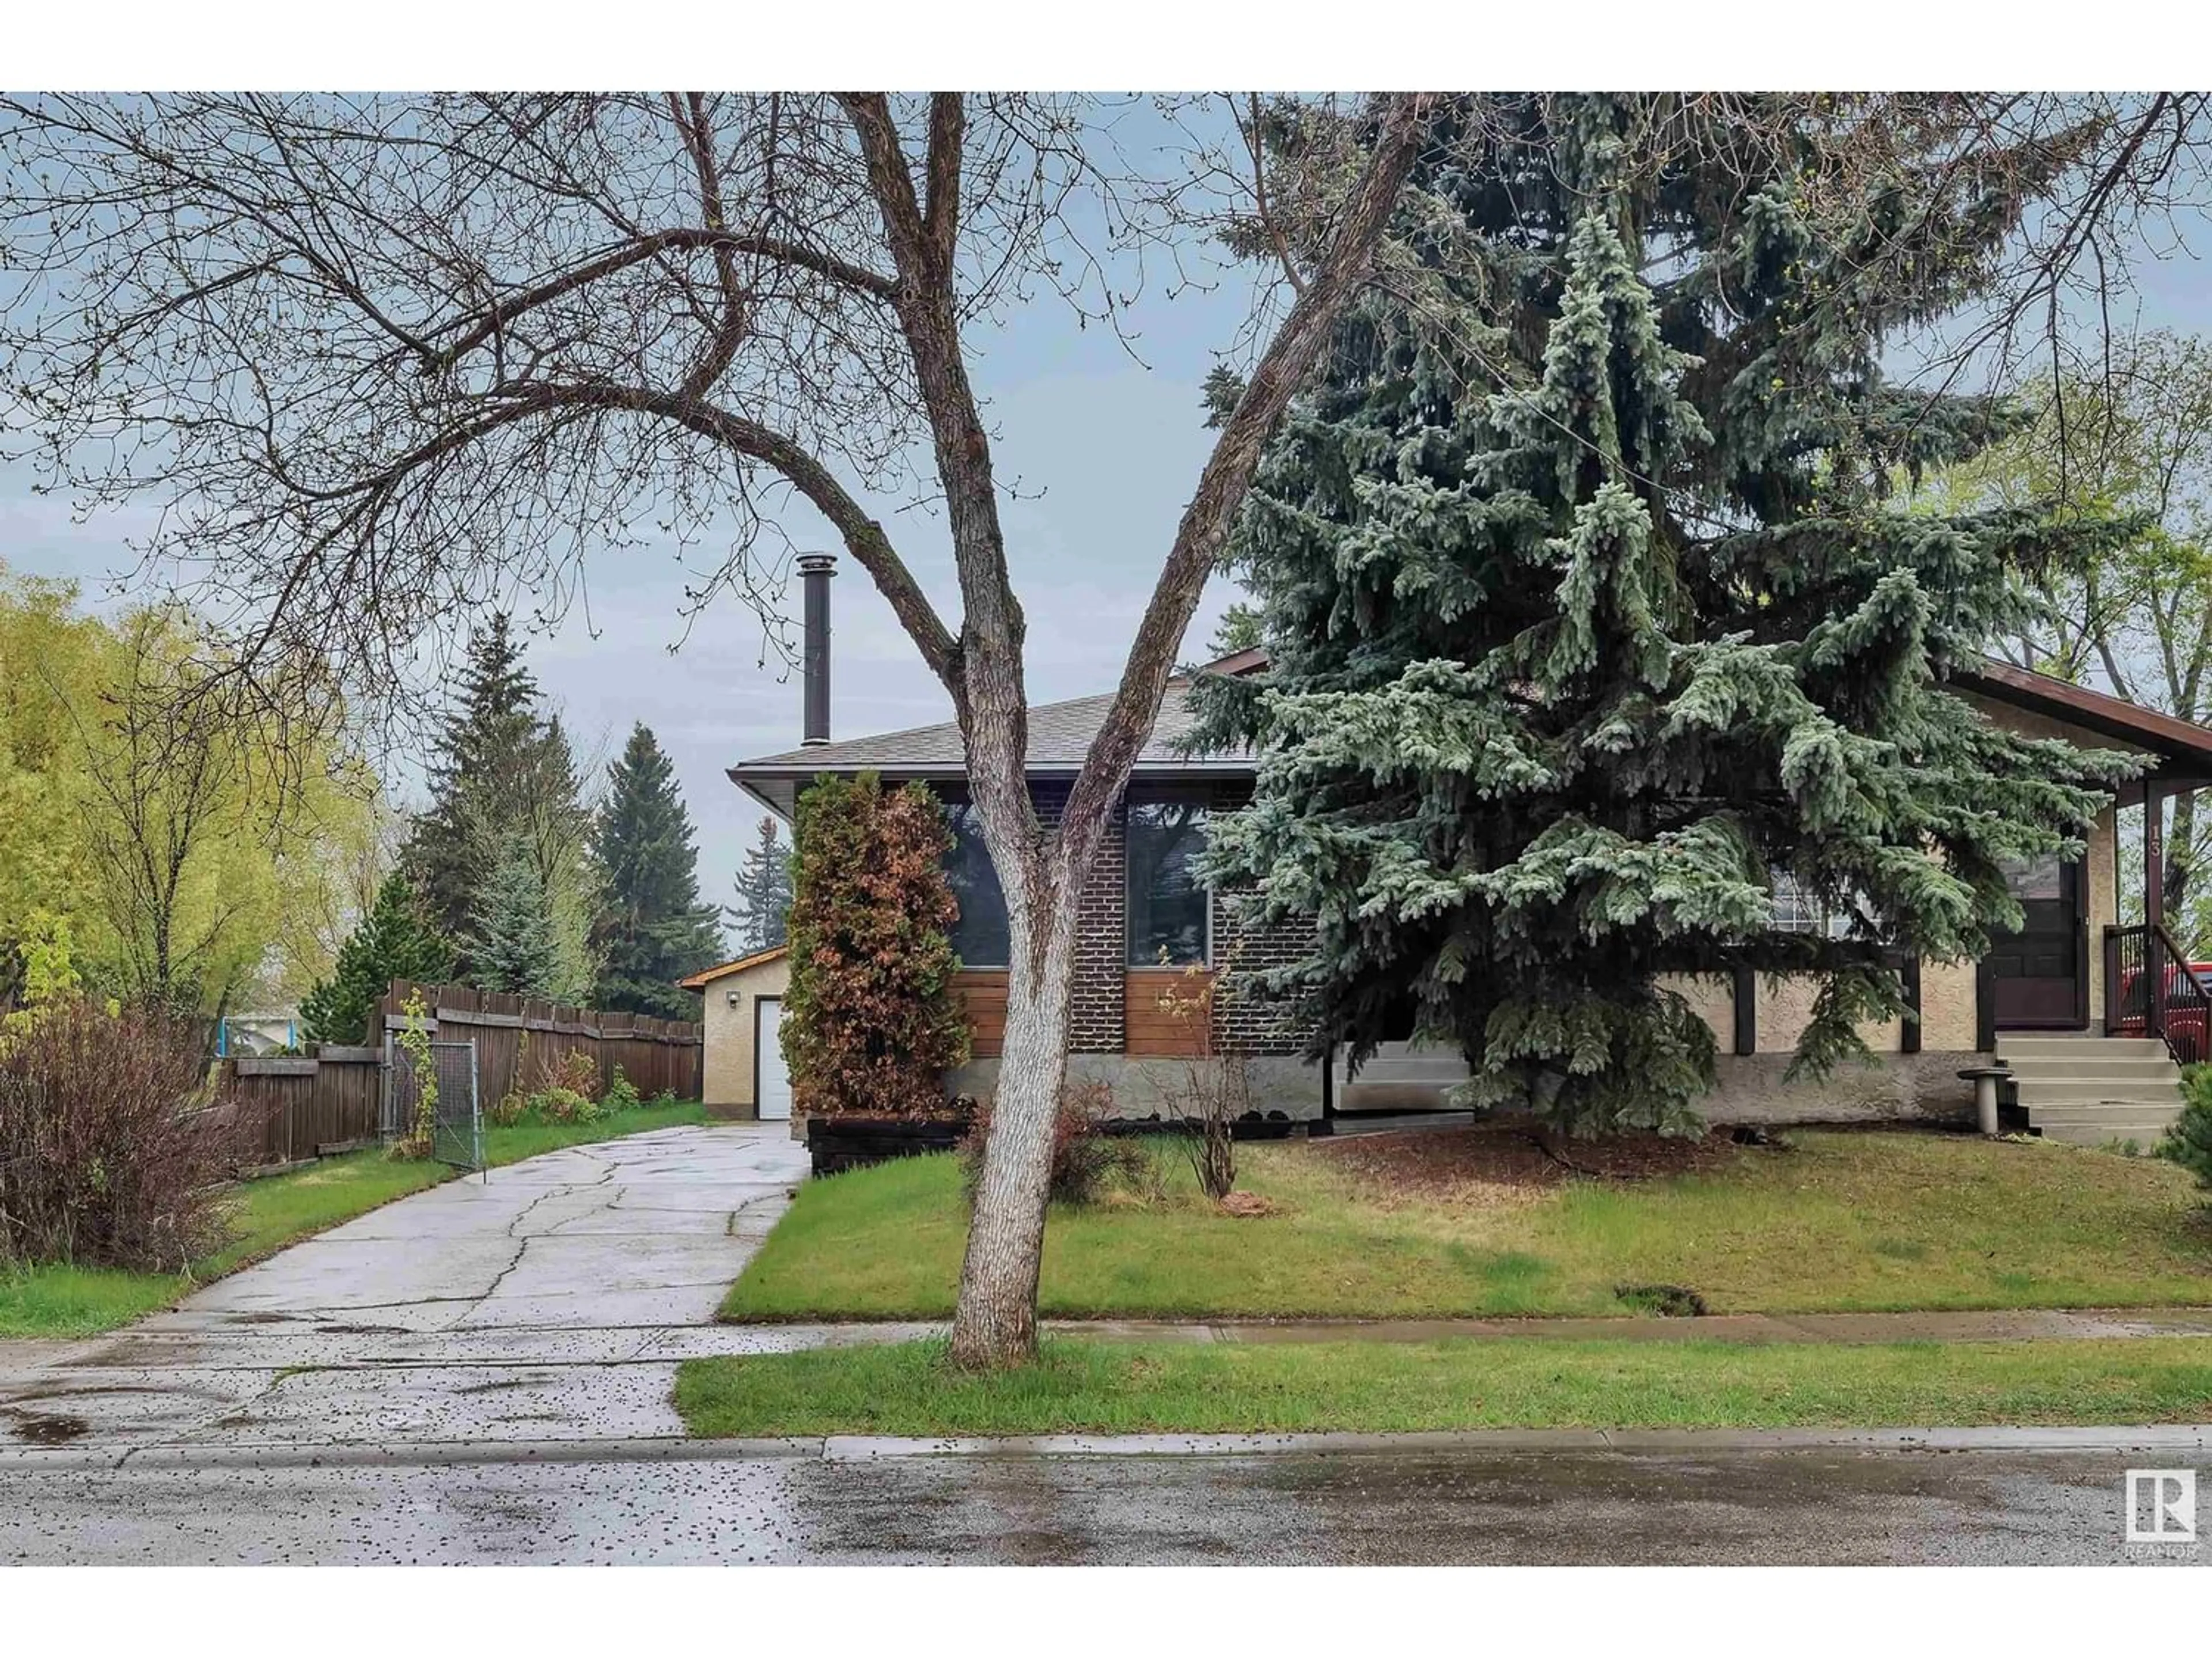 Street view for 15 WESTWOOD DR, St. Albert Alberta T8N3E3